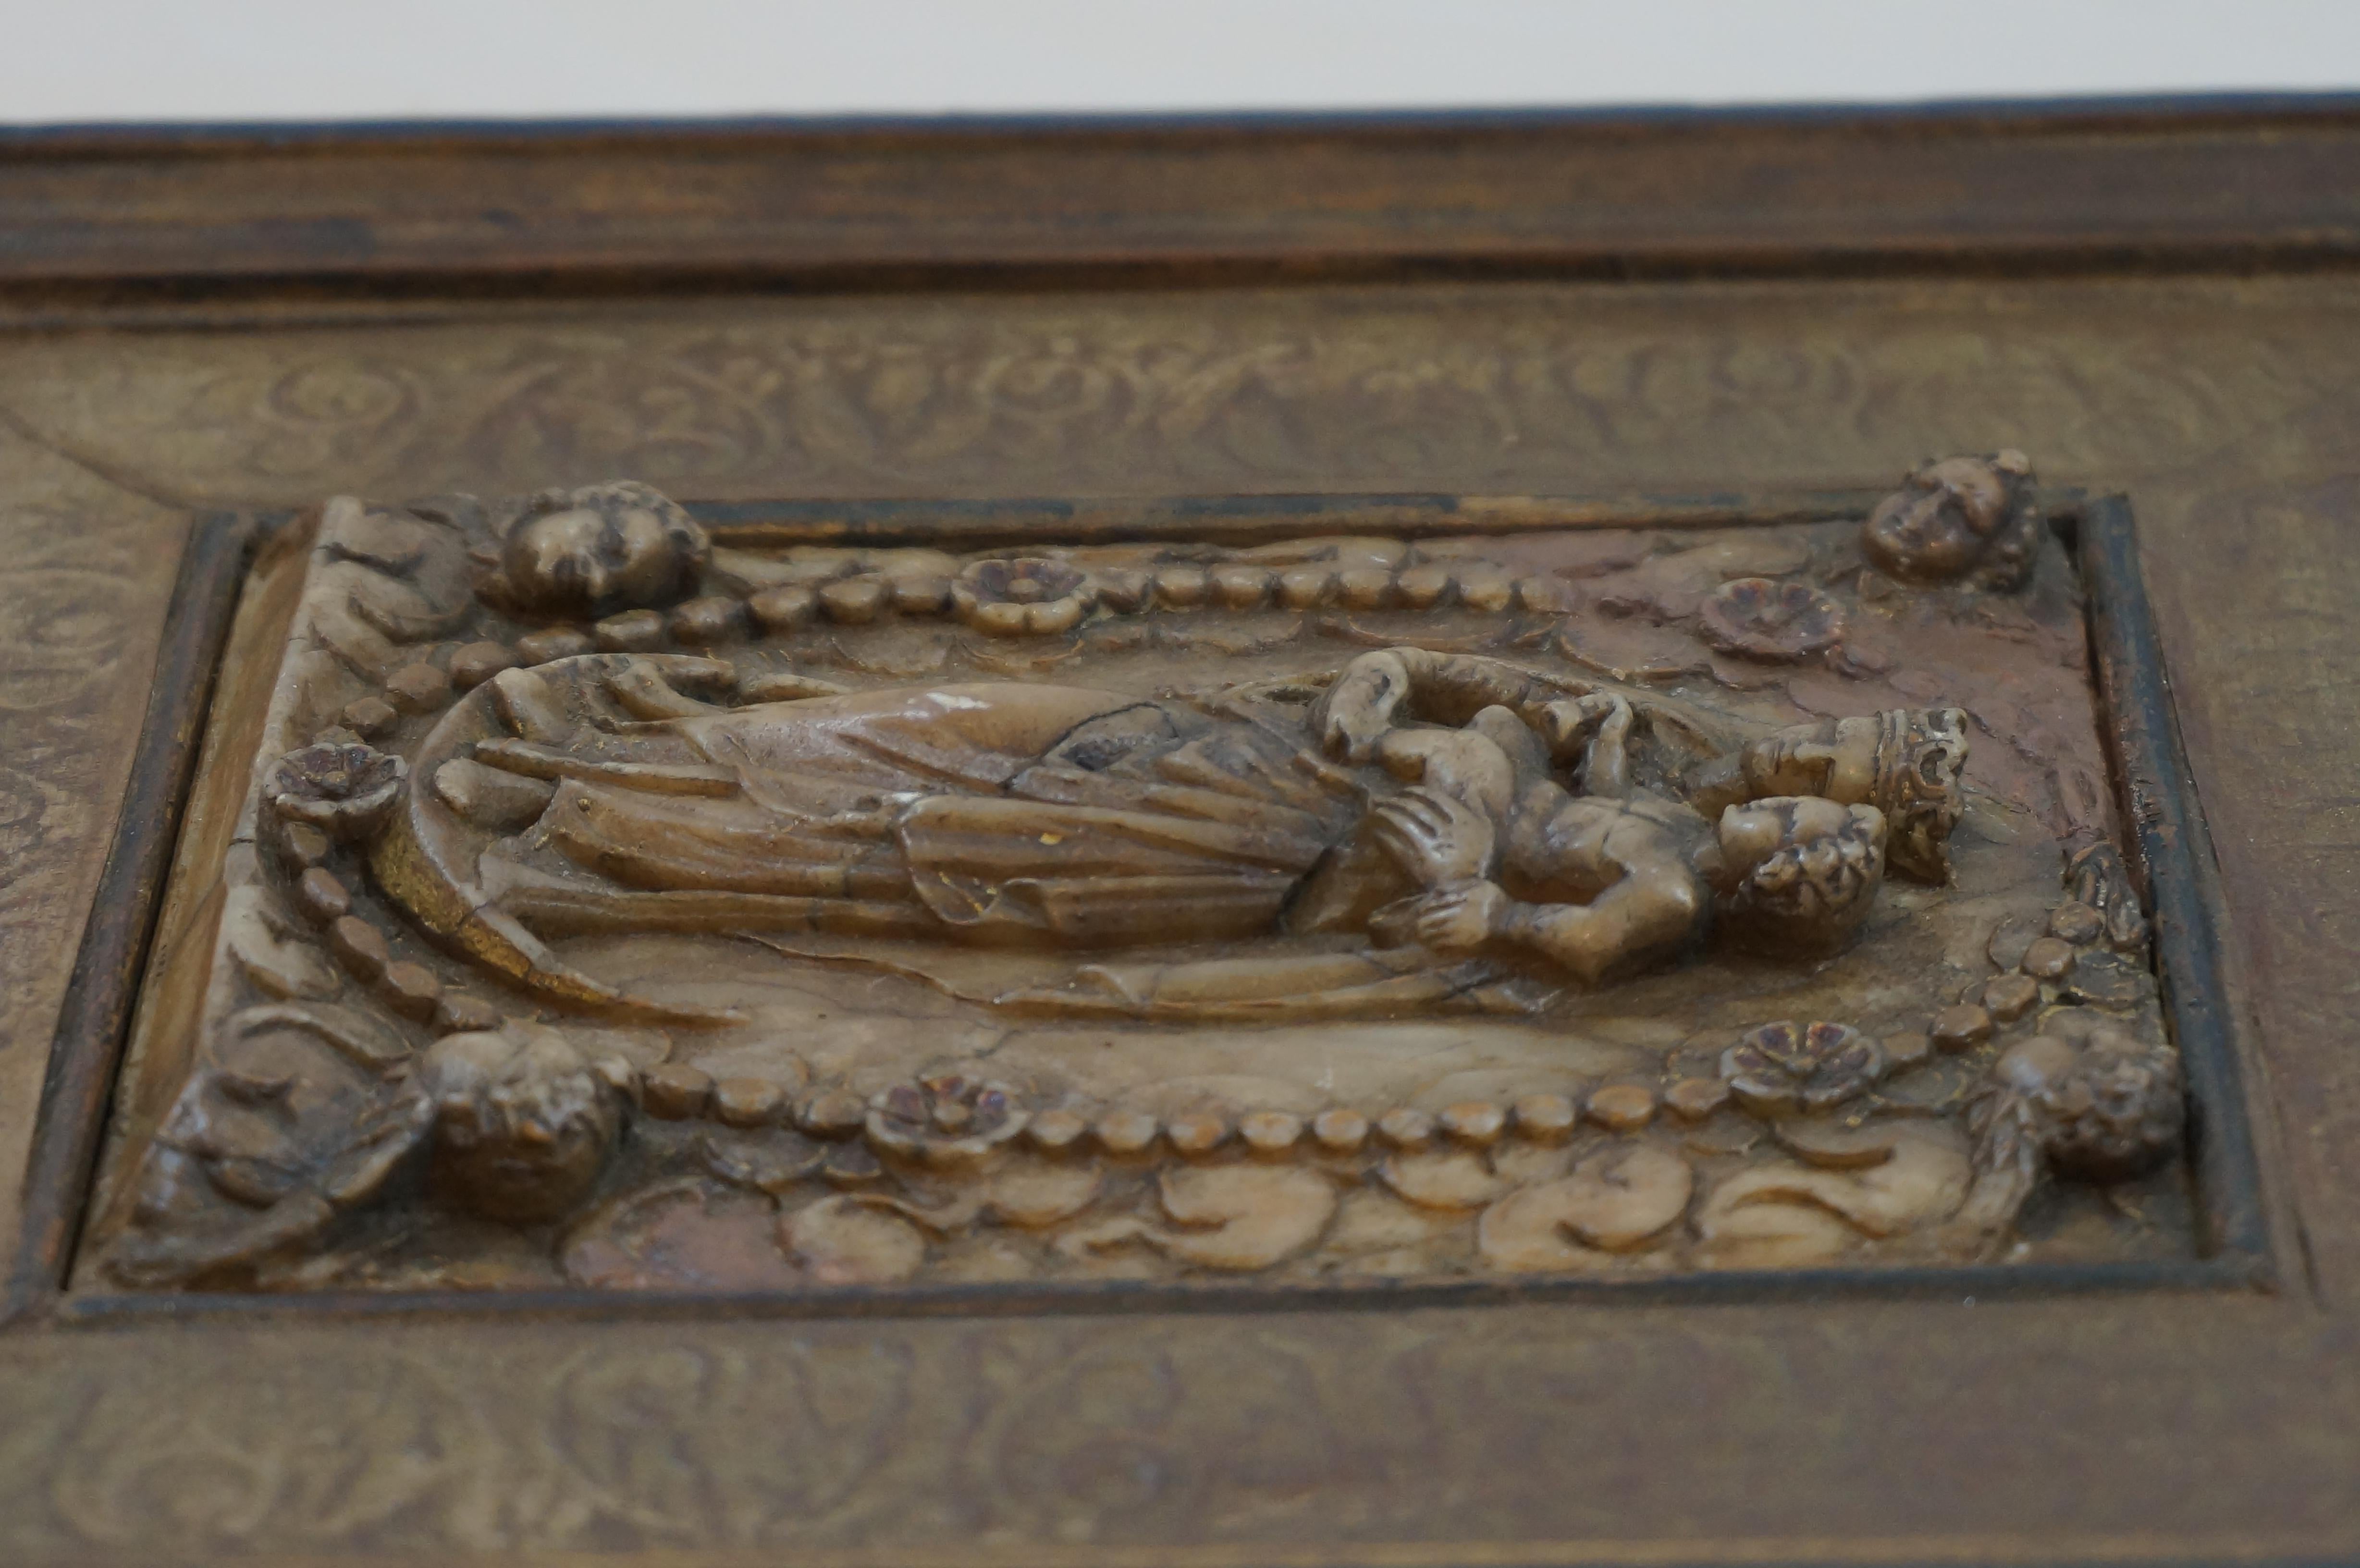  Antique alabaster relief, St. Mary of the Rosary, Belgium Malines, early 17th c 11